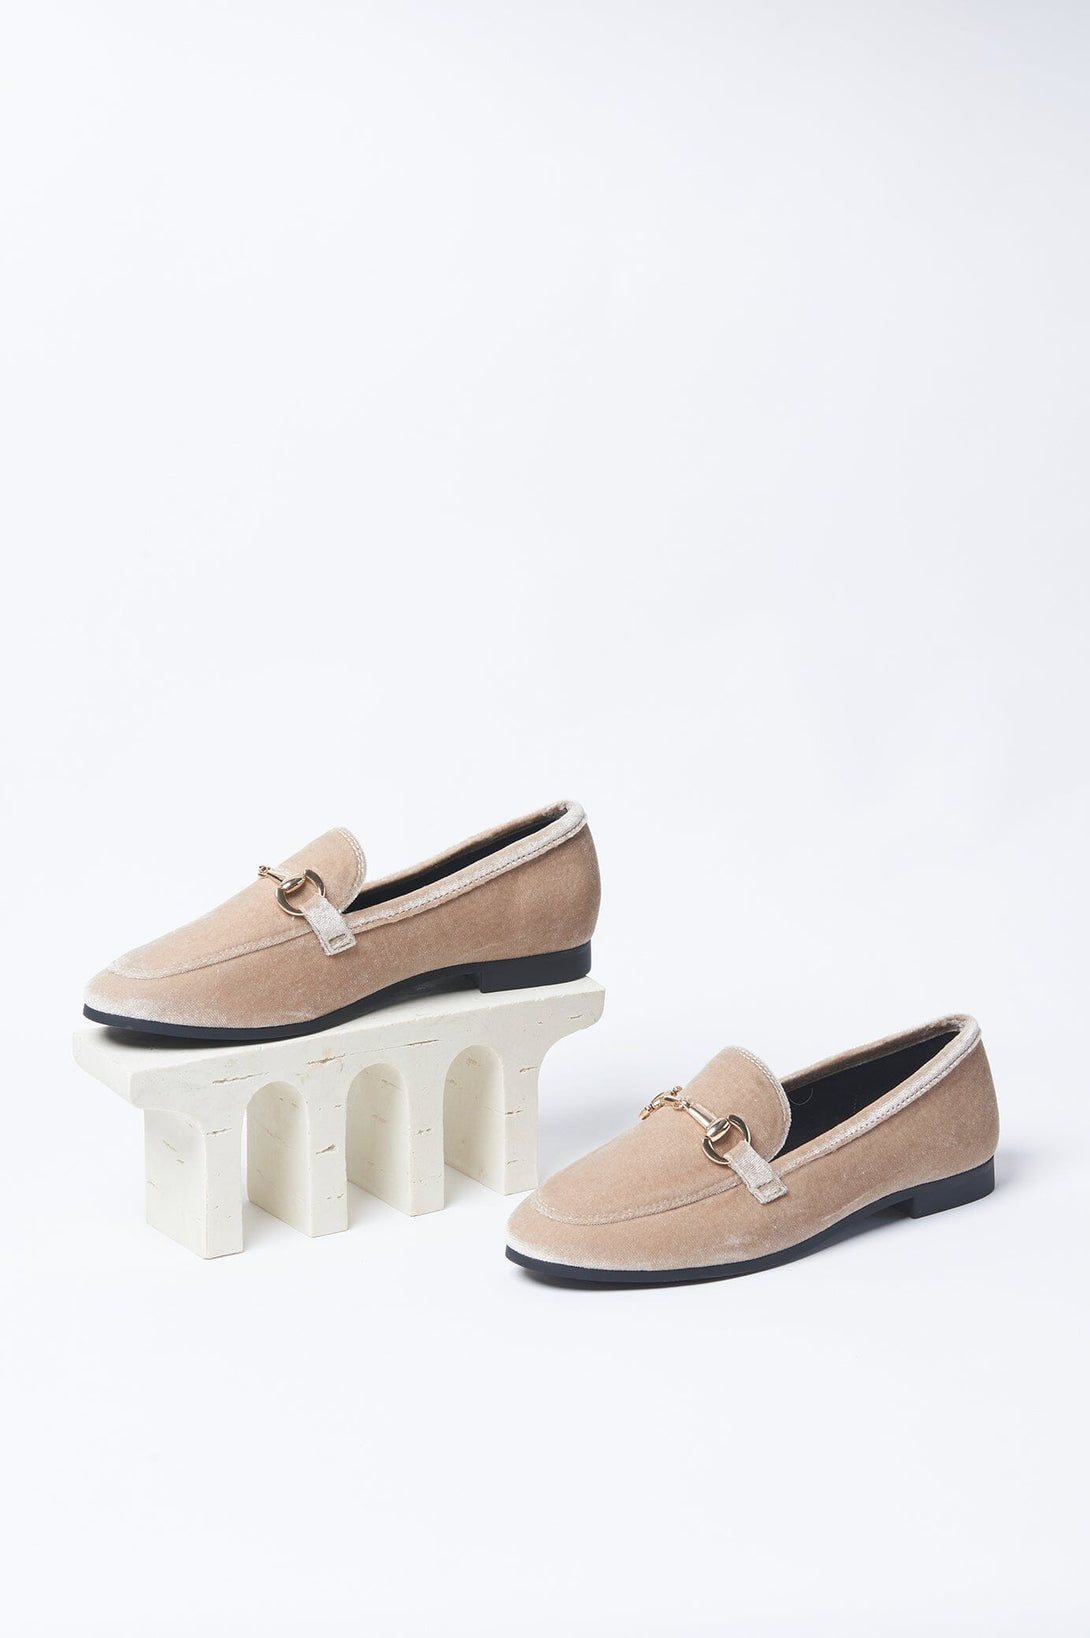 Alexia Loafers Champagne Shoes